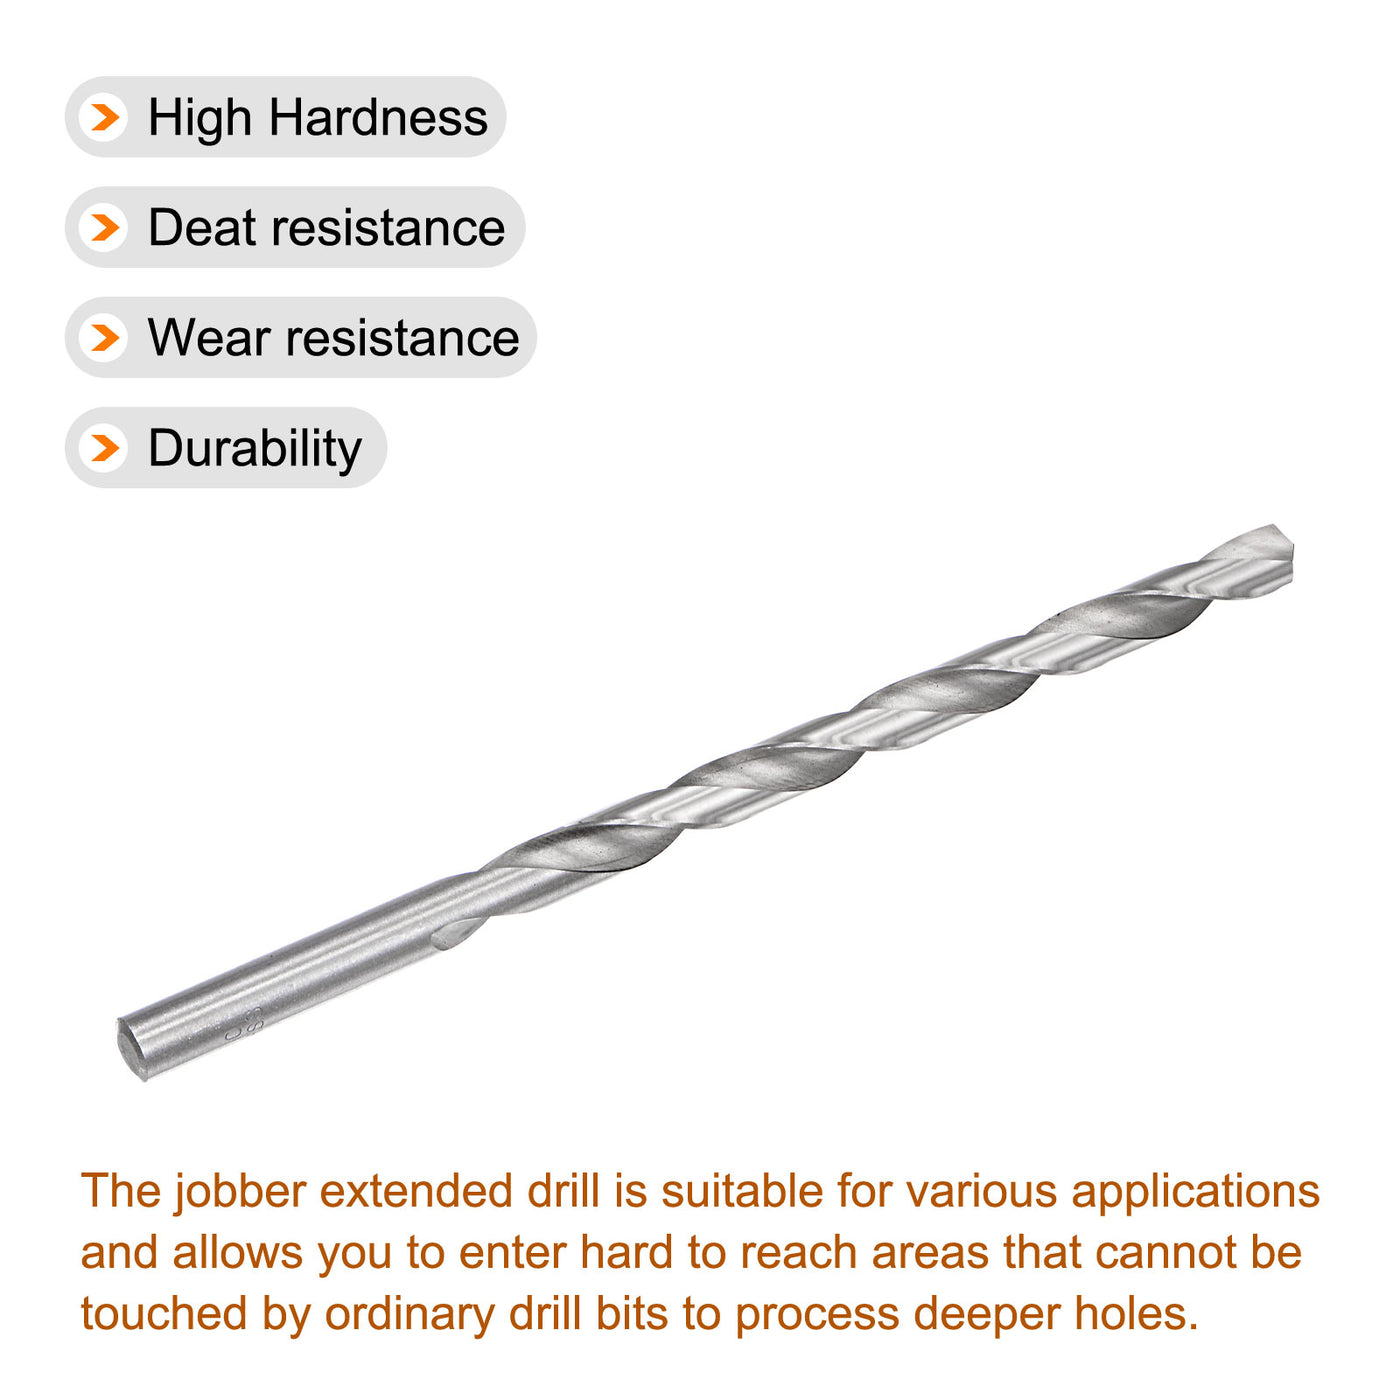 uxcell Uxcell 10mm Twist Drill Bits, High-Speed Steel Extra Long Drill Bit 200mm Length